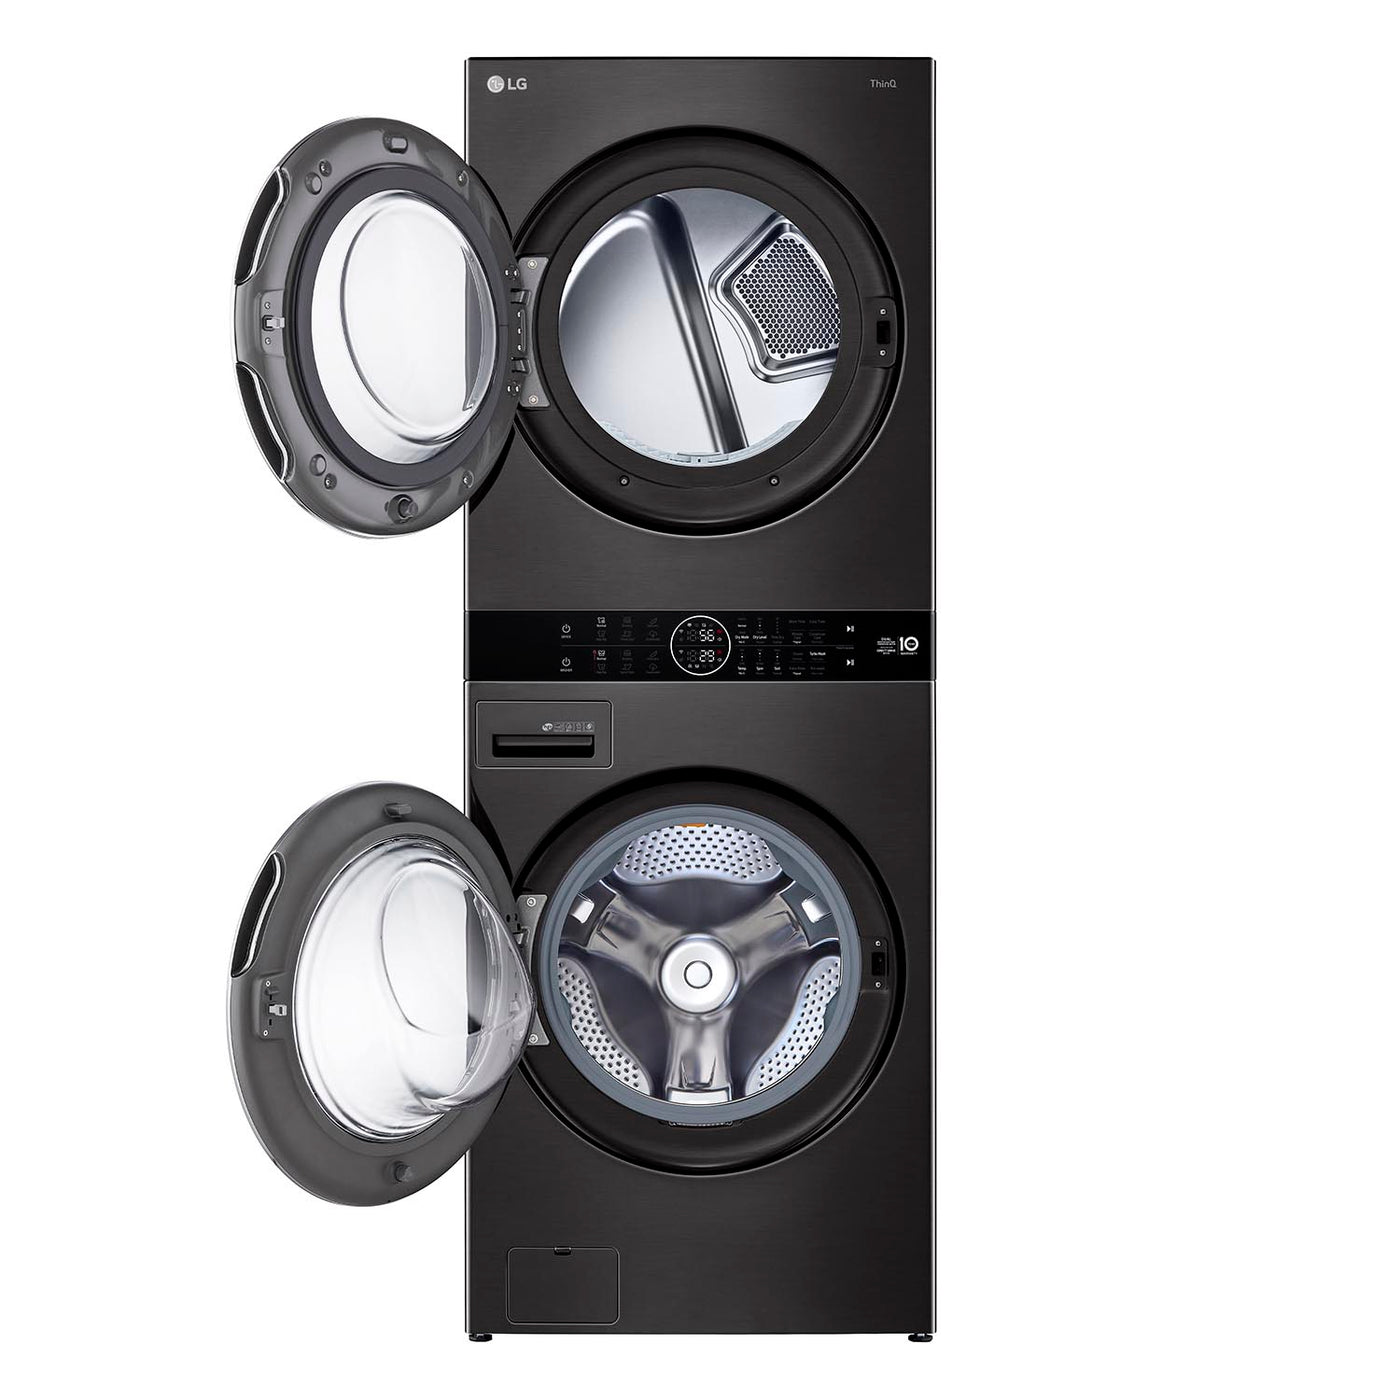 LG Black Stainless Steel Wash Tower™ 5.2 Cu. Ft. Front Load Washer and 7.4 Cu. Ft. Heat Pump Ventless Dryer - WKHC202HBA